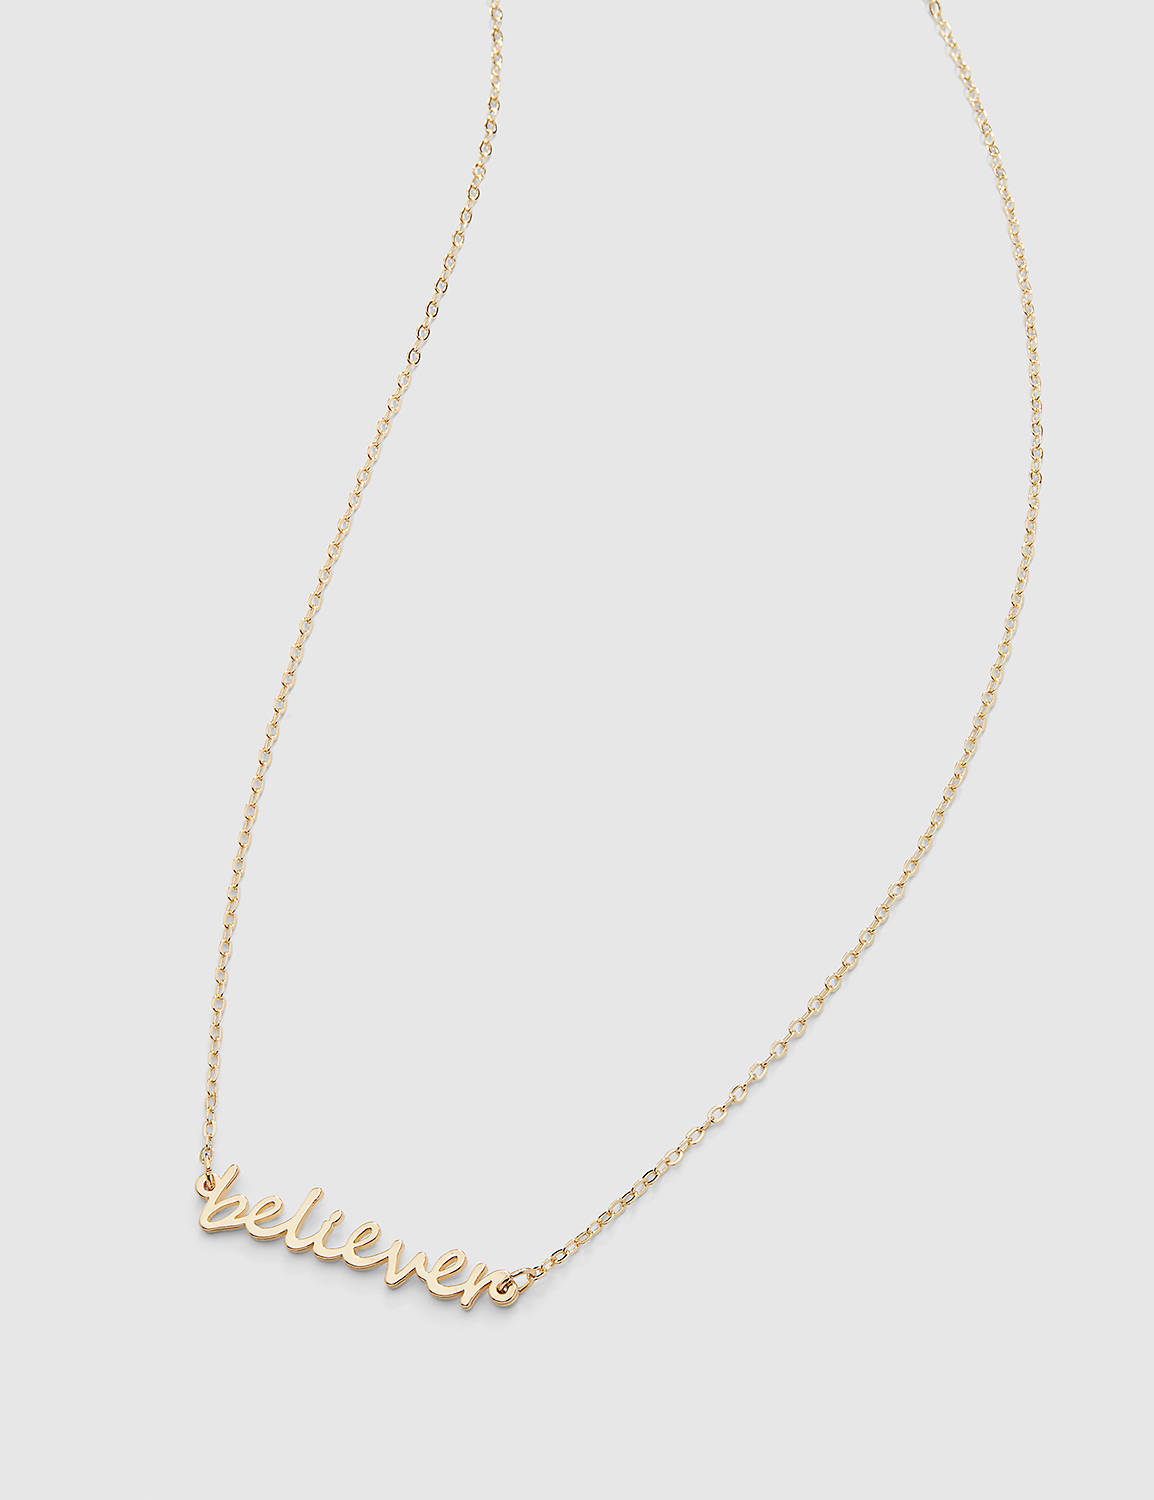 Believer Necklace:Gold Tone:ONESZ Product Image 1